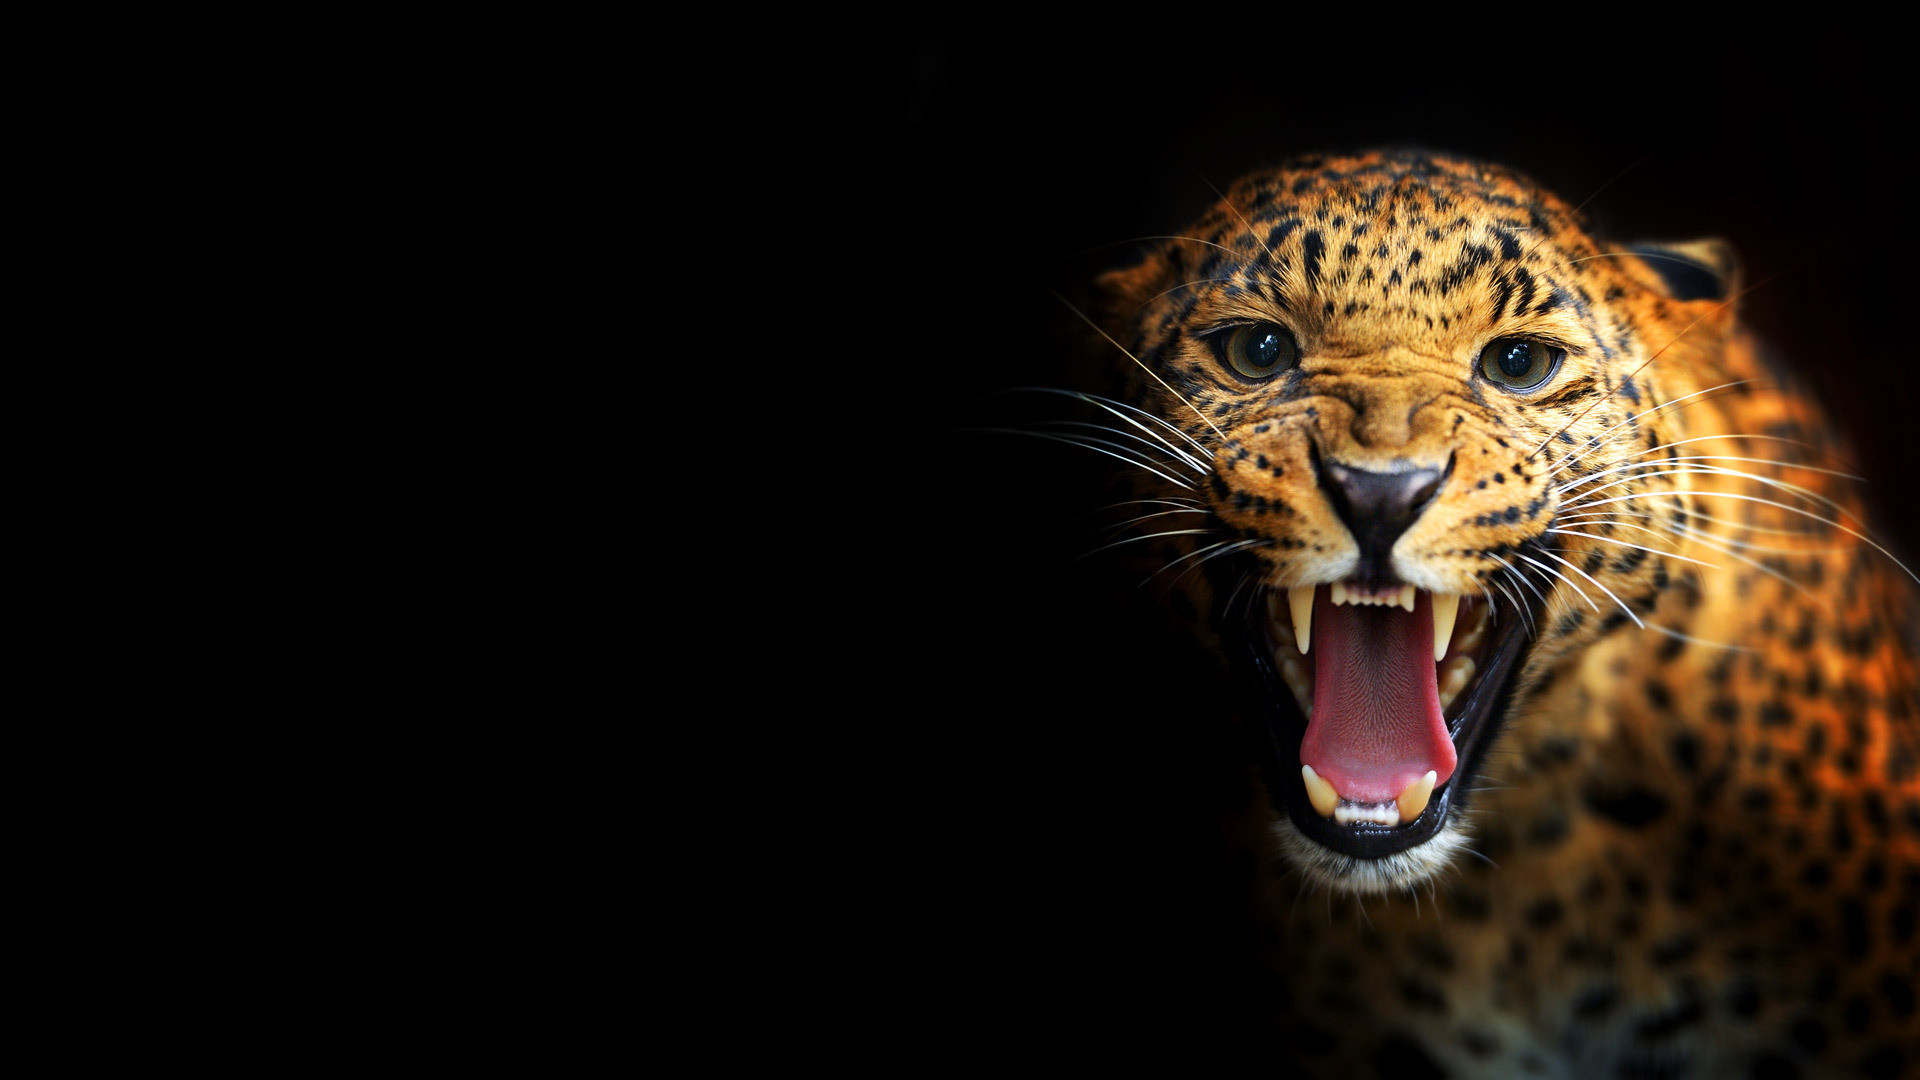 1920x1080 ... WallpaperSafari Animals Leopard Wallpapers HD Images $ New Pictures For  Free Download ...